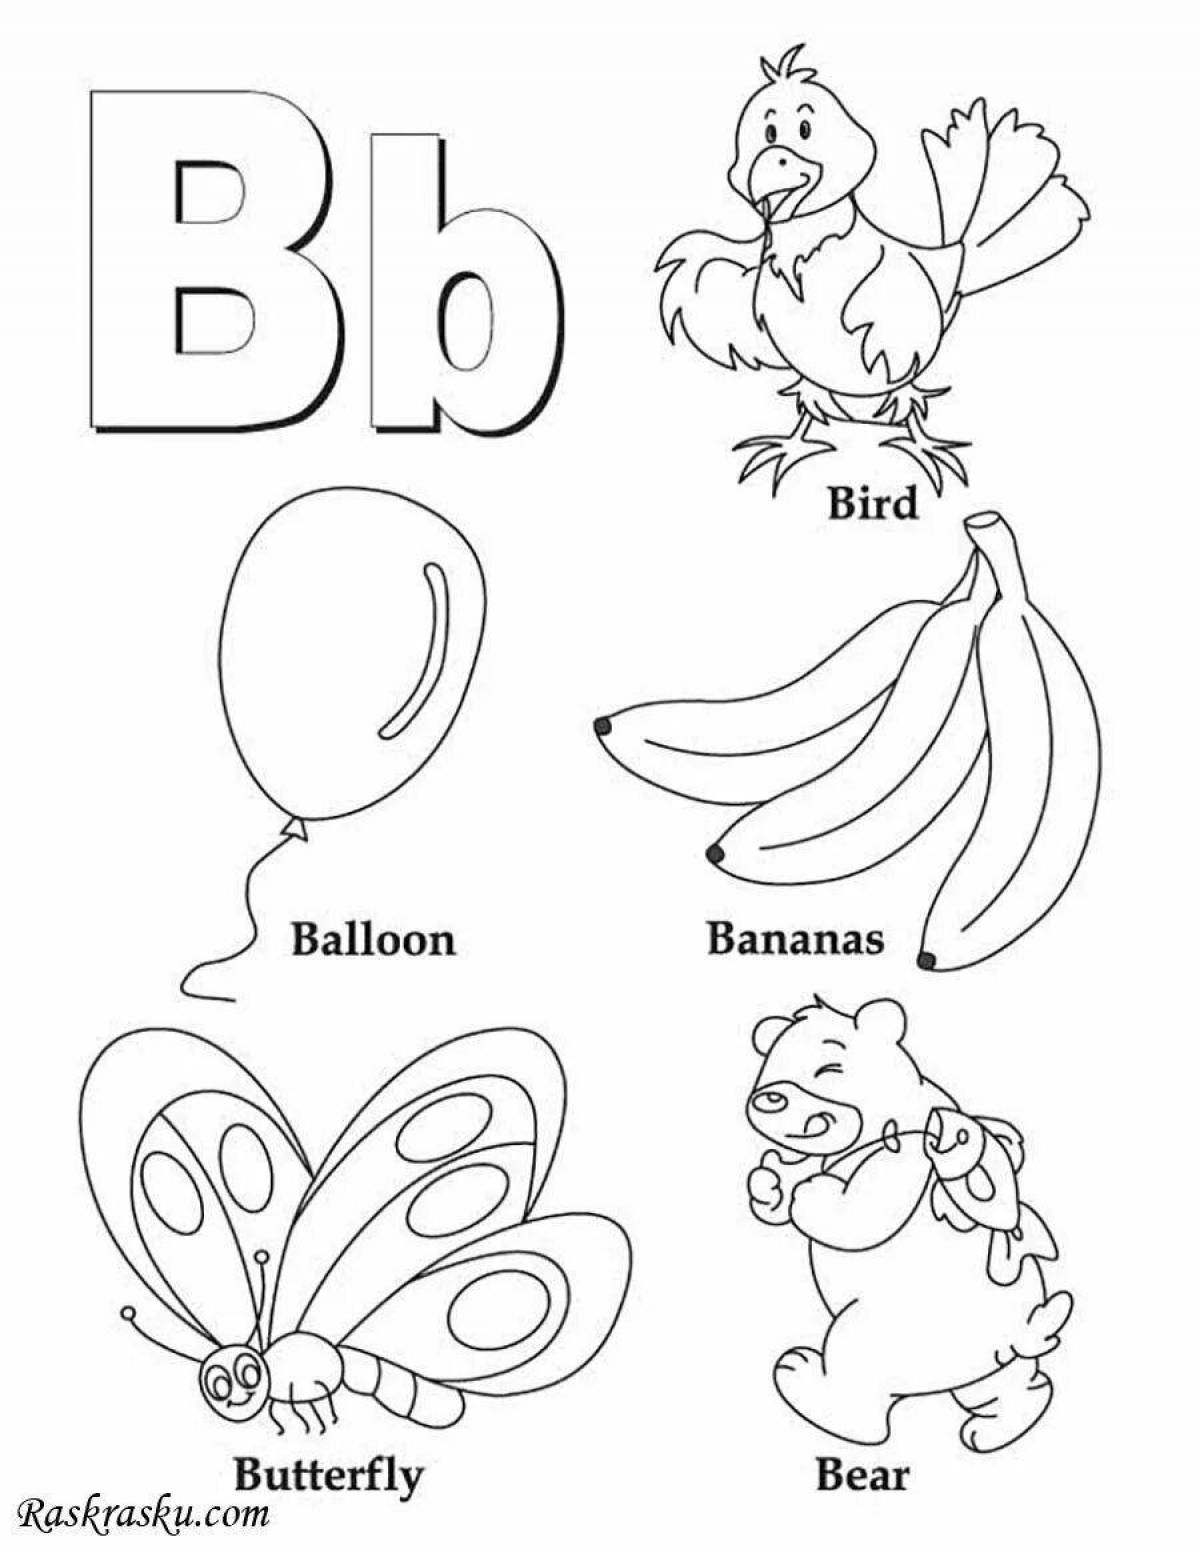 Colourful english letters coloring book for kids